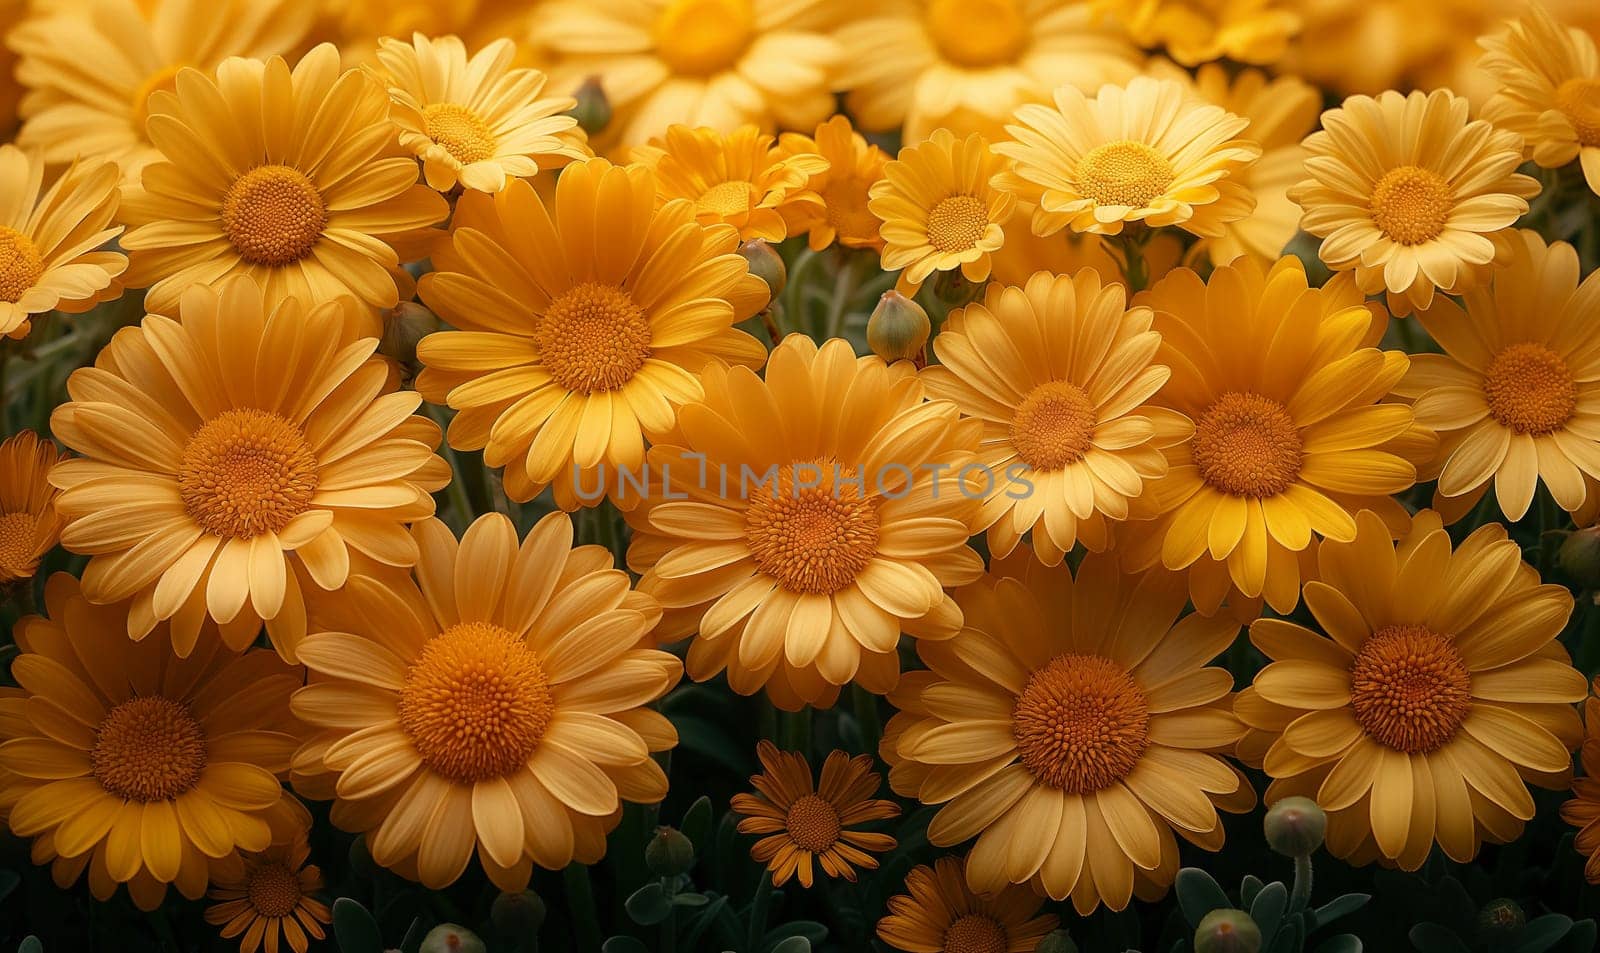 Vibrant Yellow Daisies in Full Bloom by Fischeron